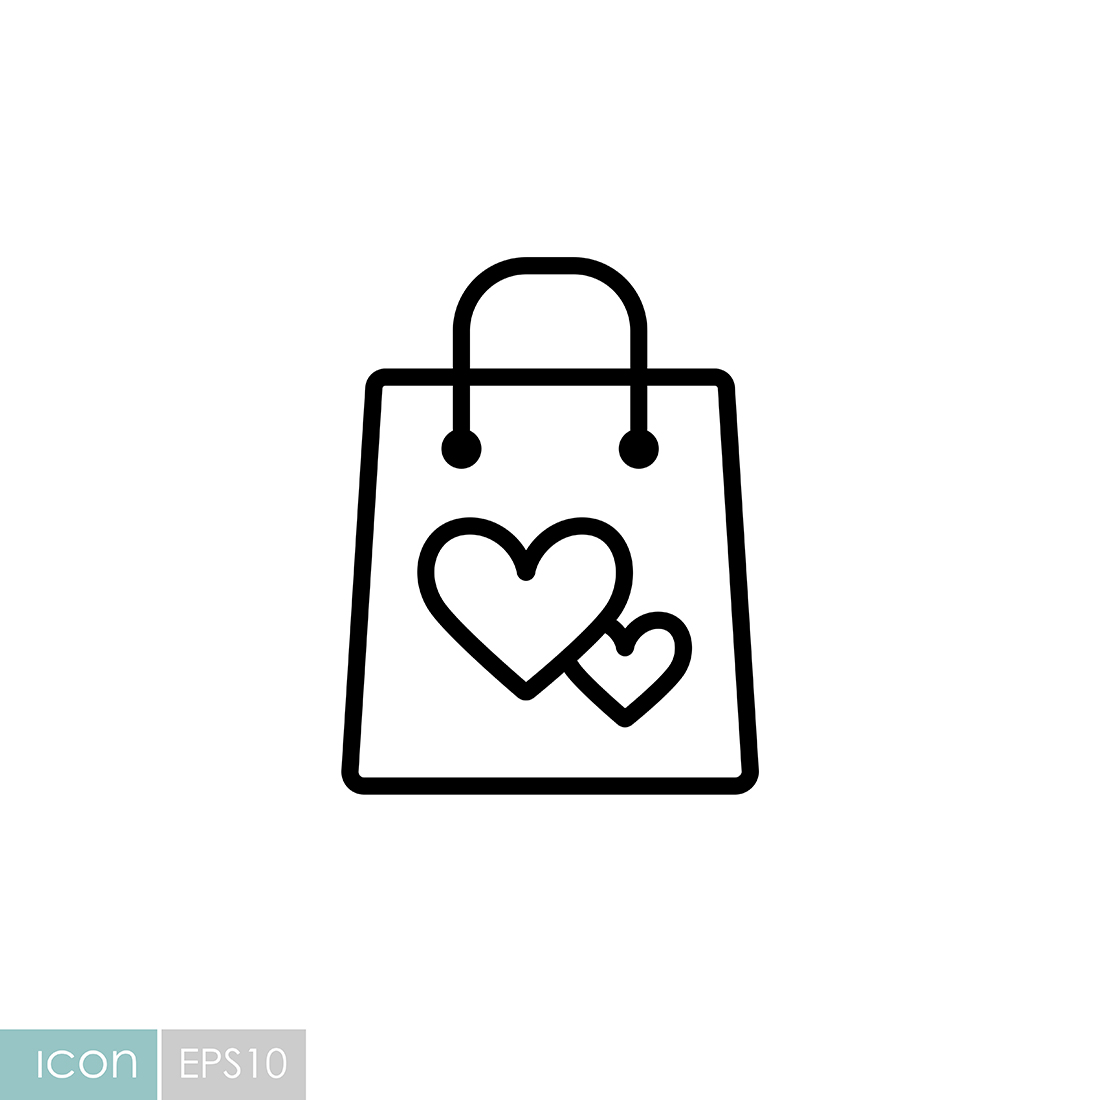 Package icon with a heart.